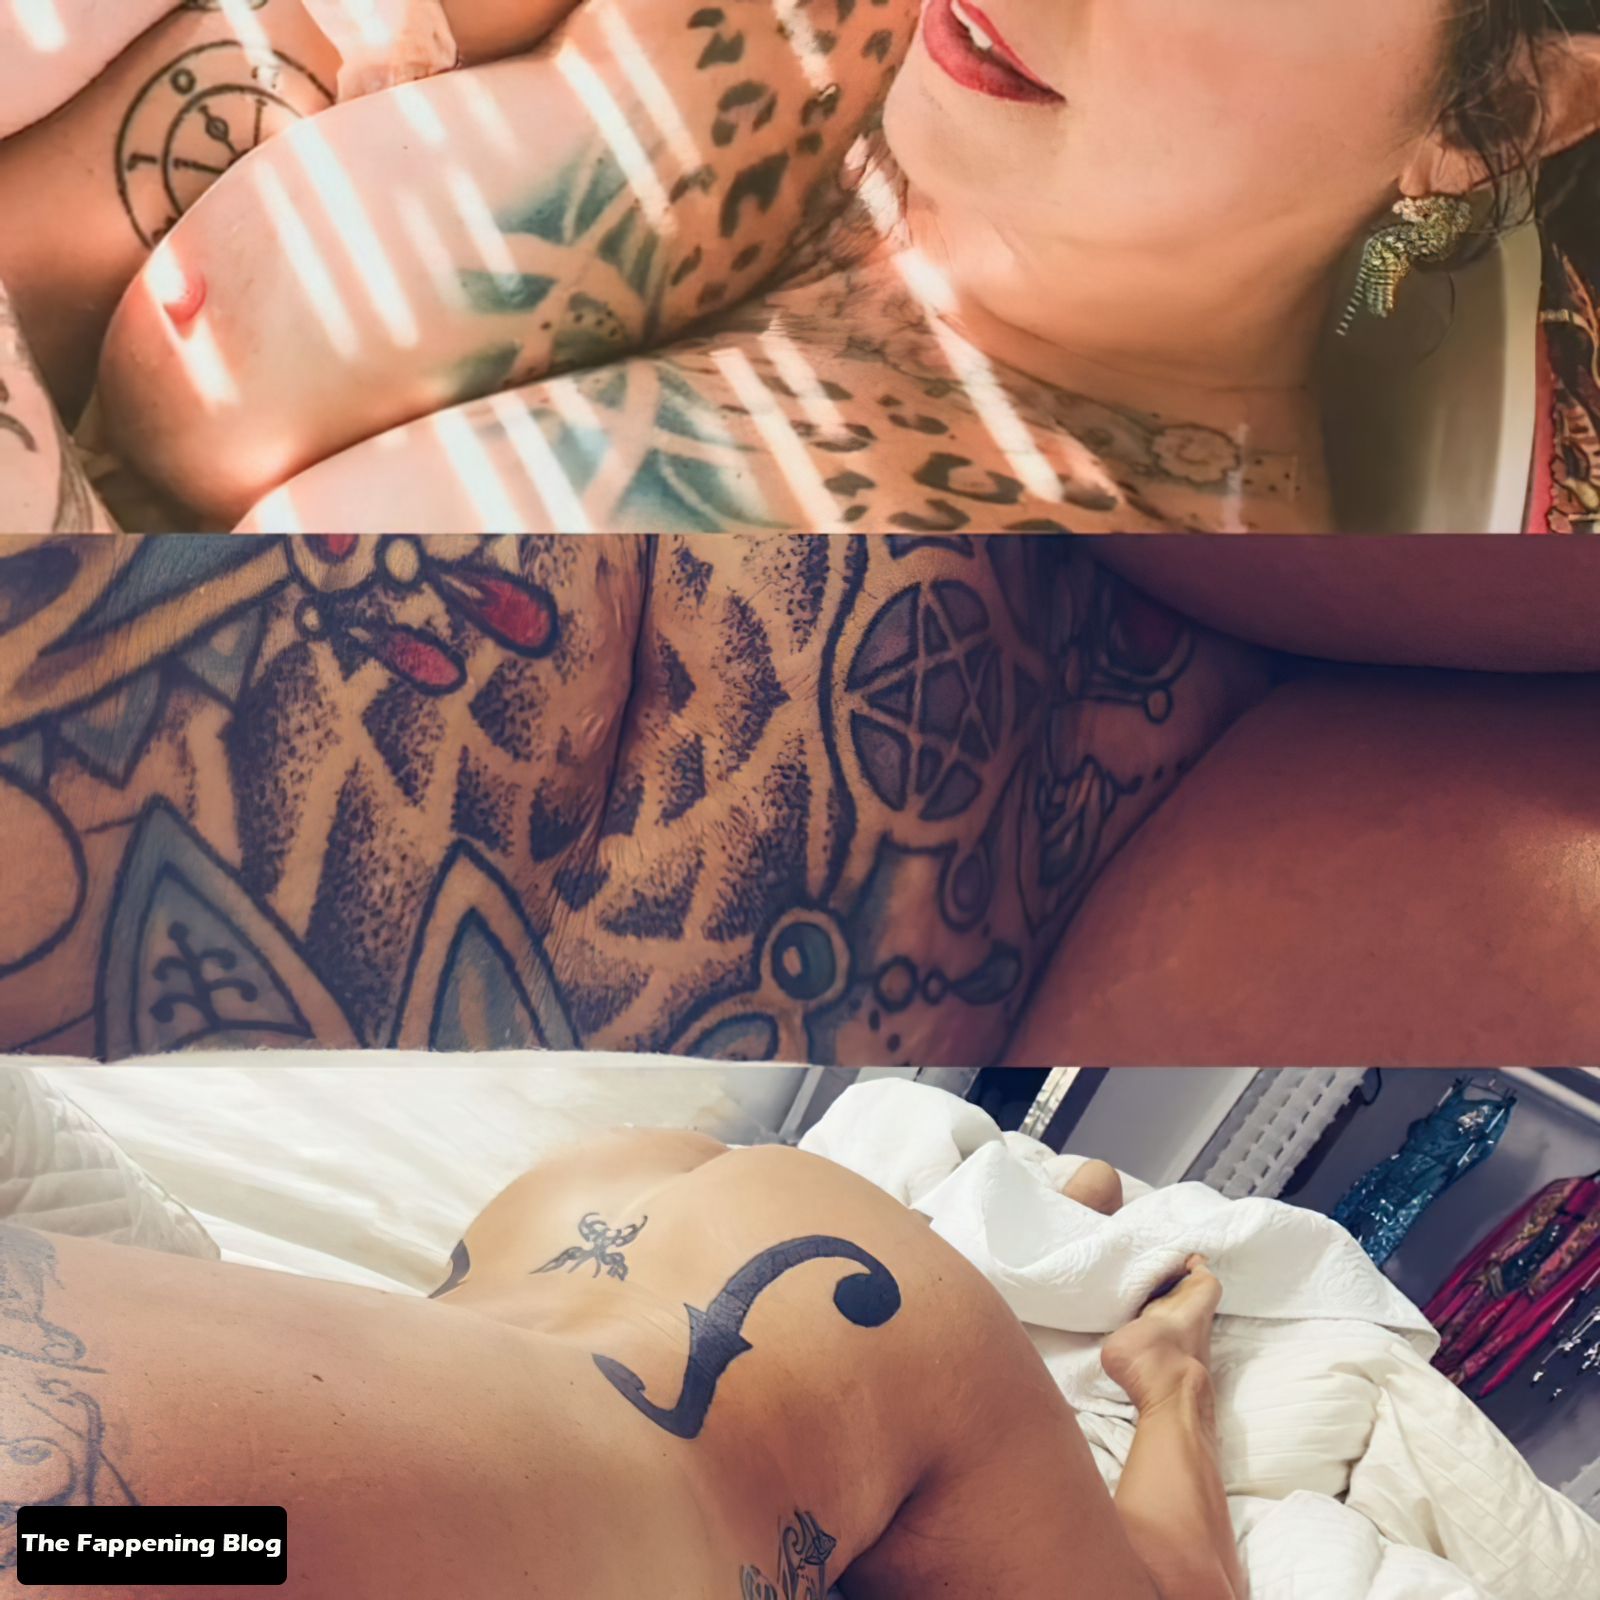 Danielle colby nude